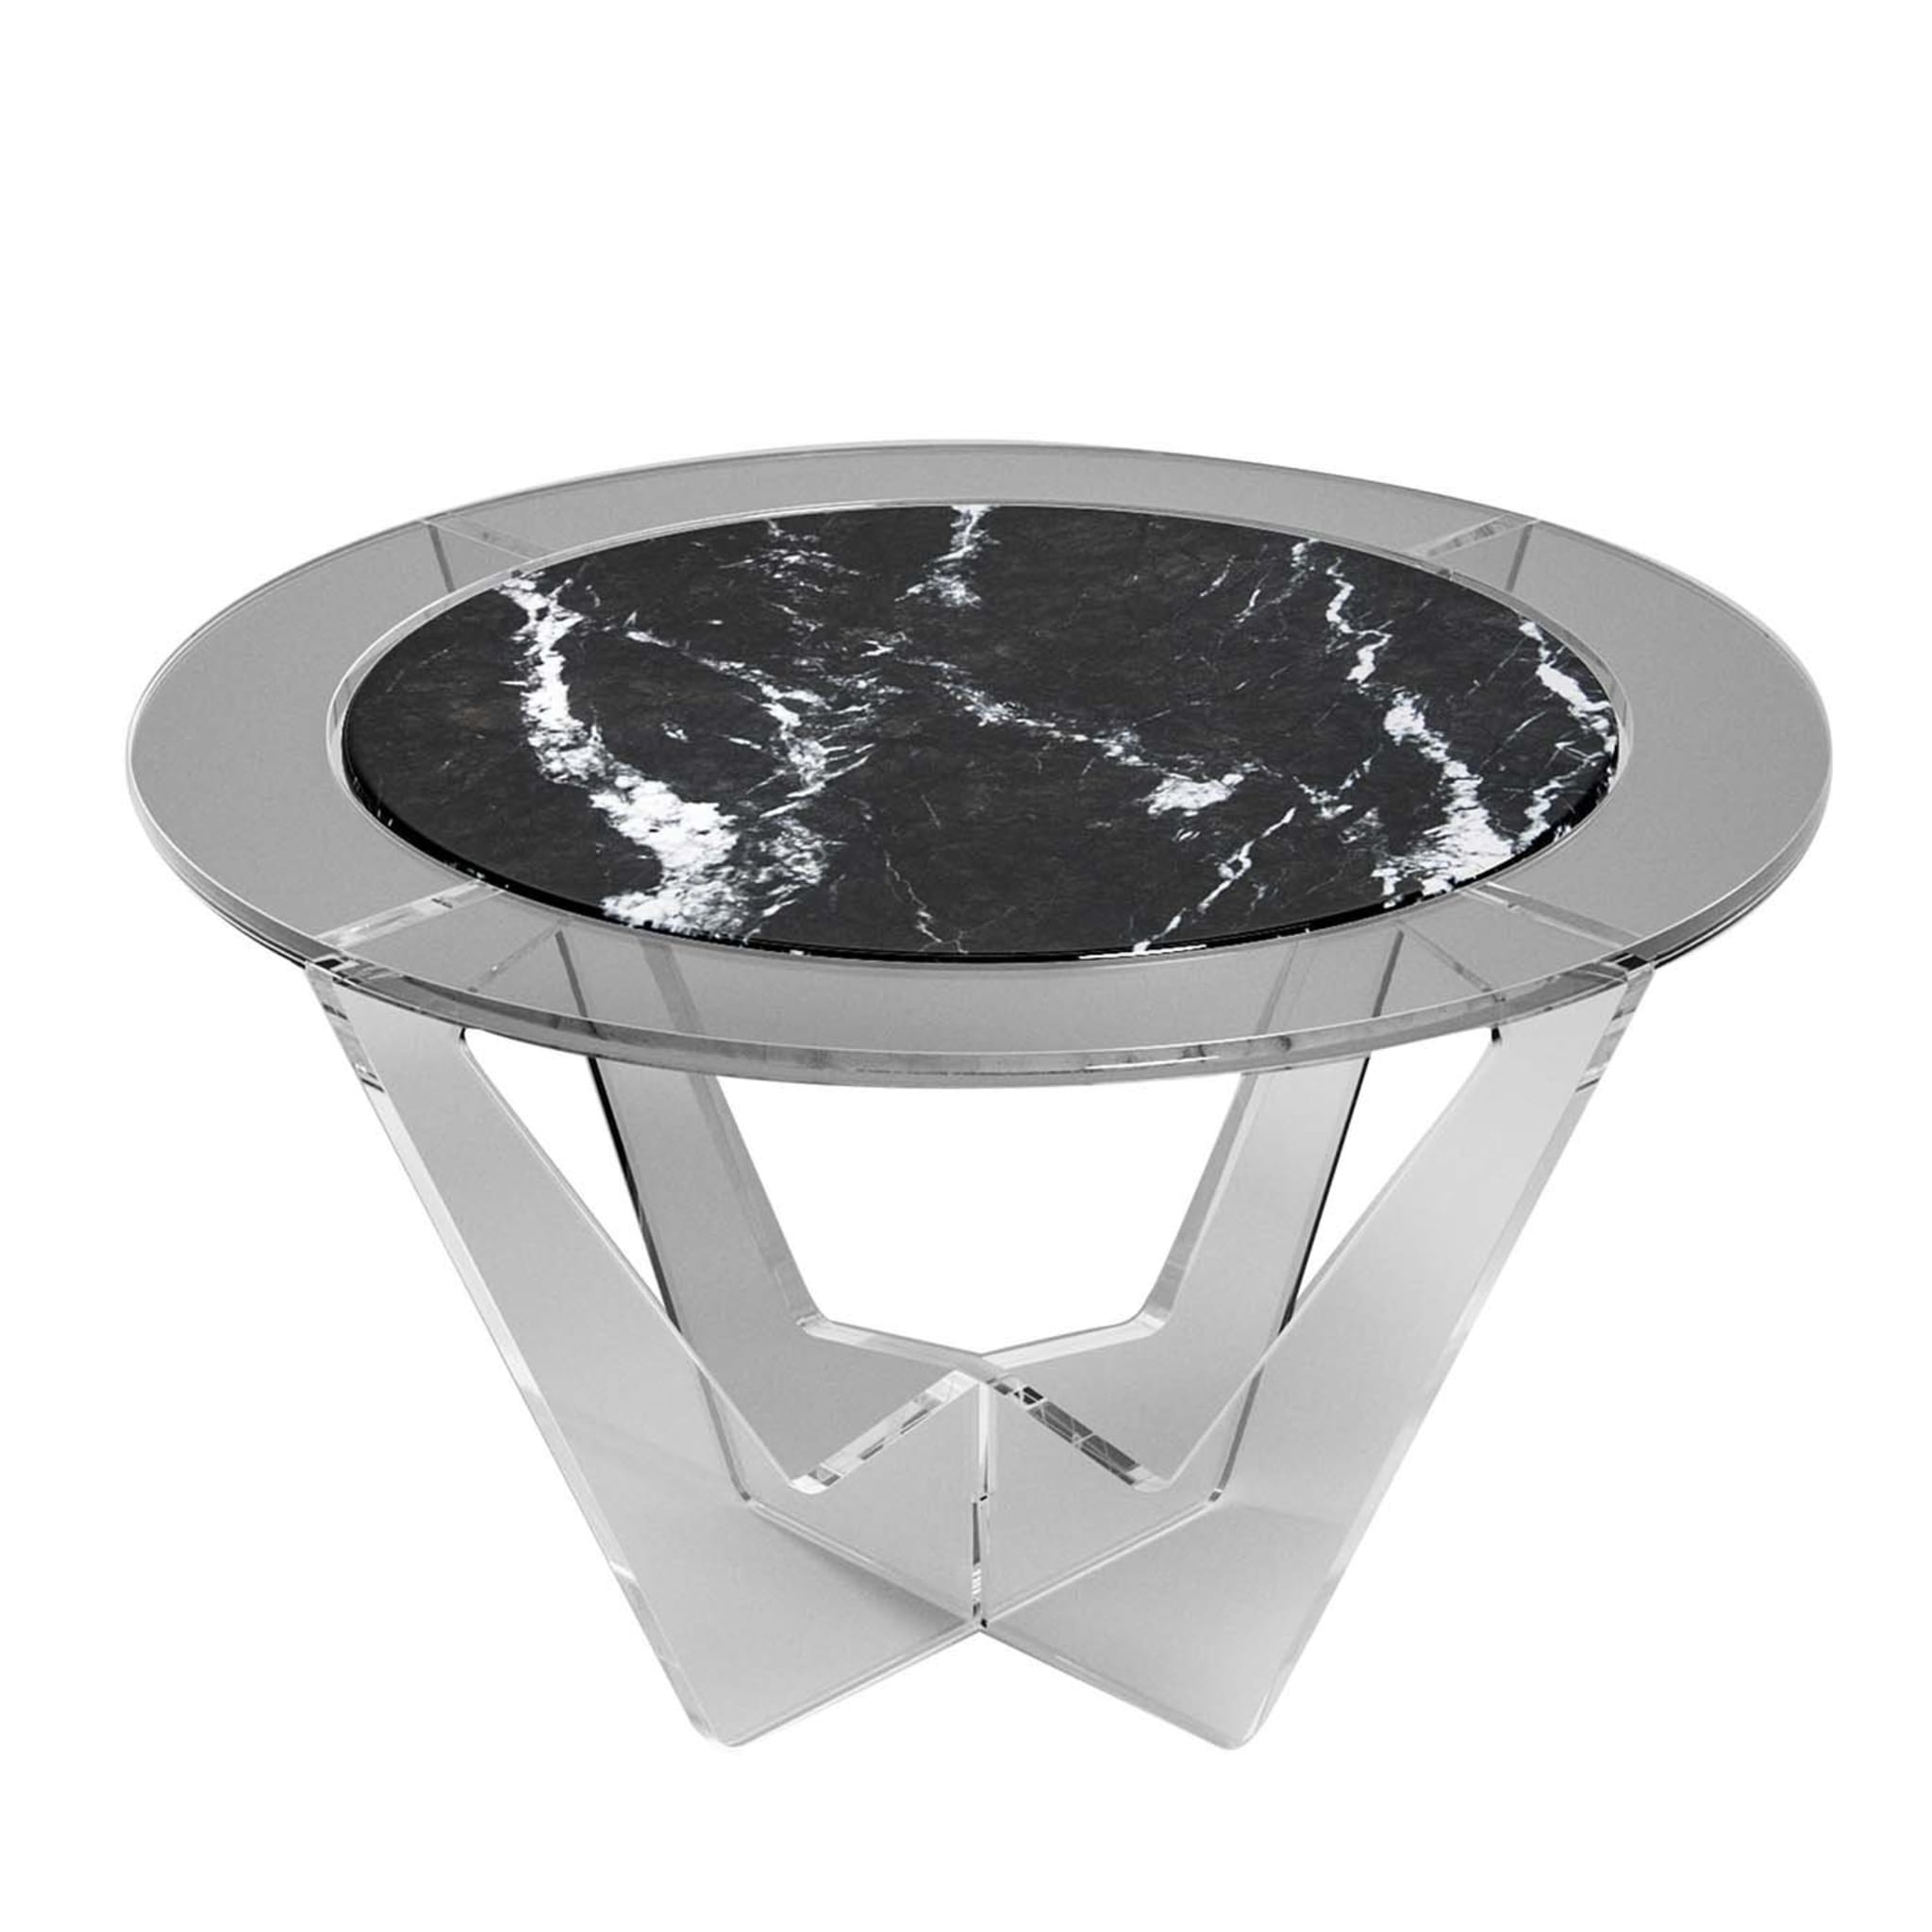 Hac Gray Round Coffee Table with Gray Carnico Marble Top - Main view